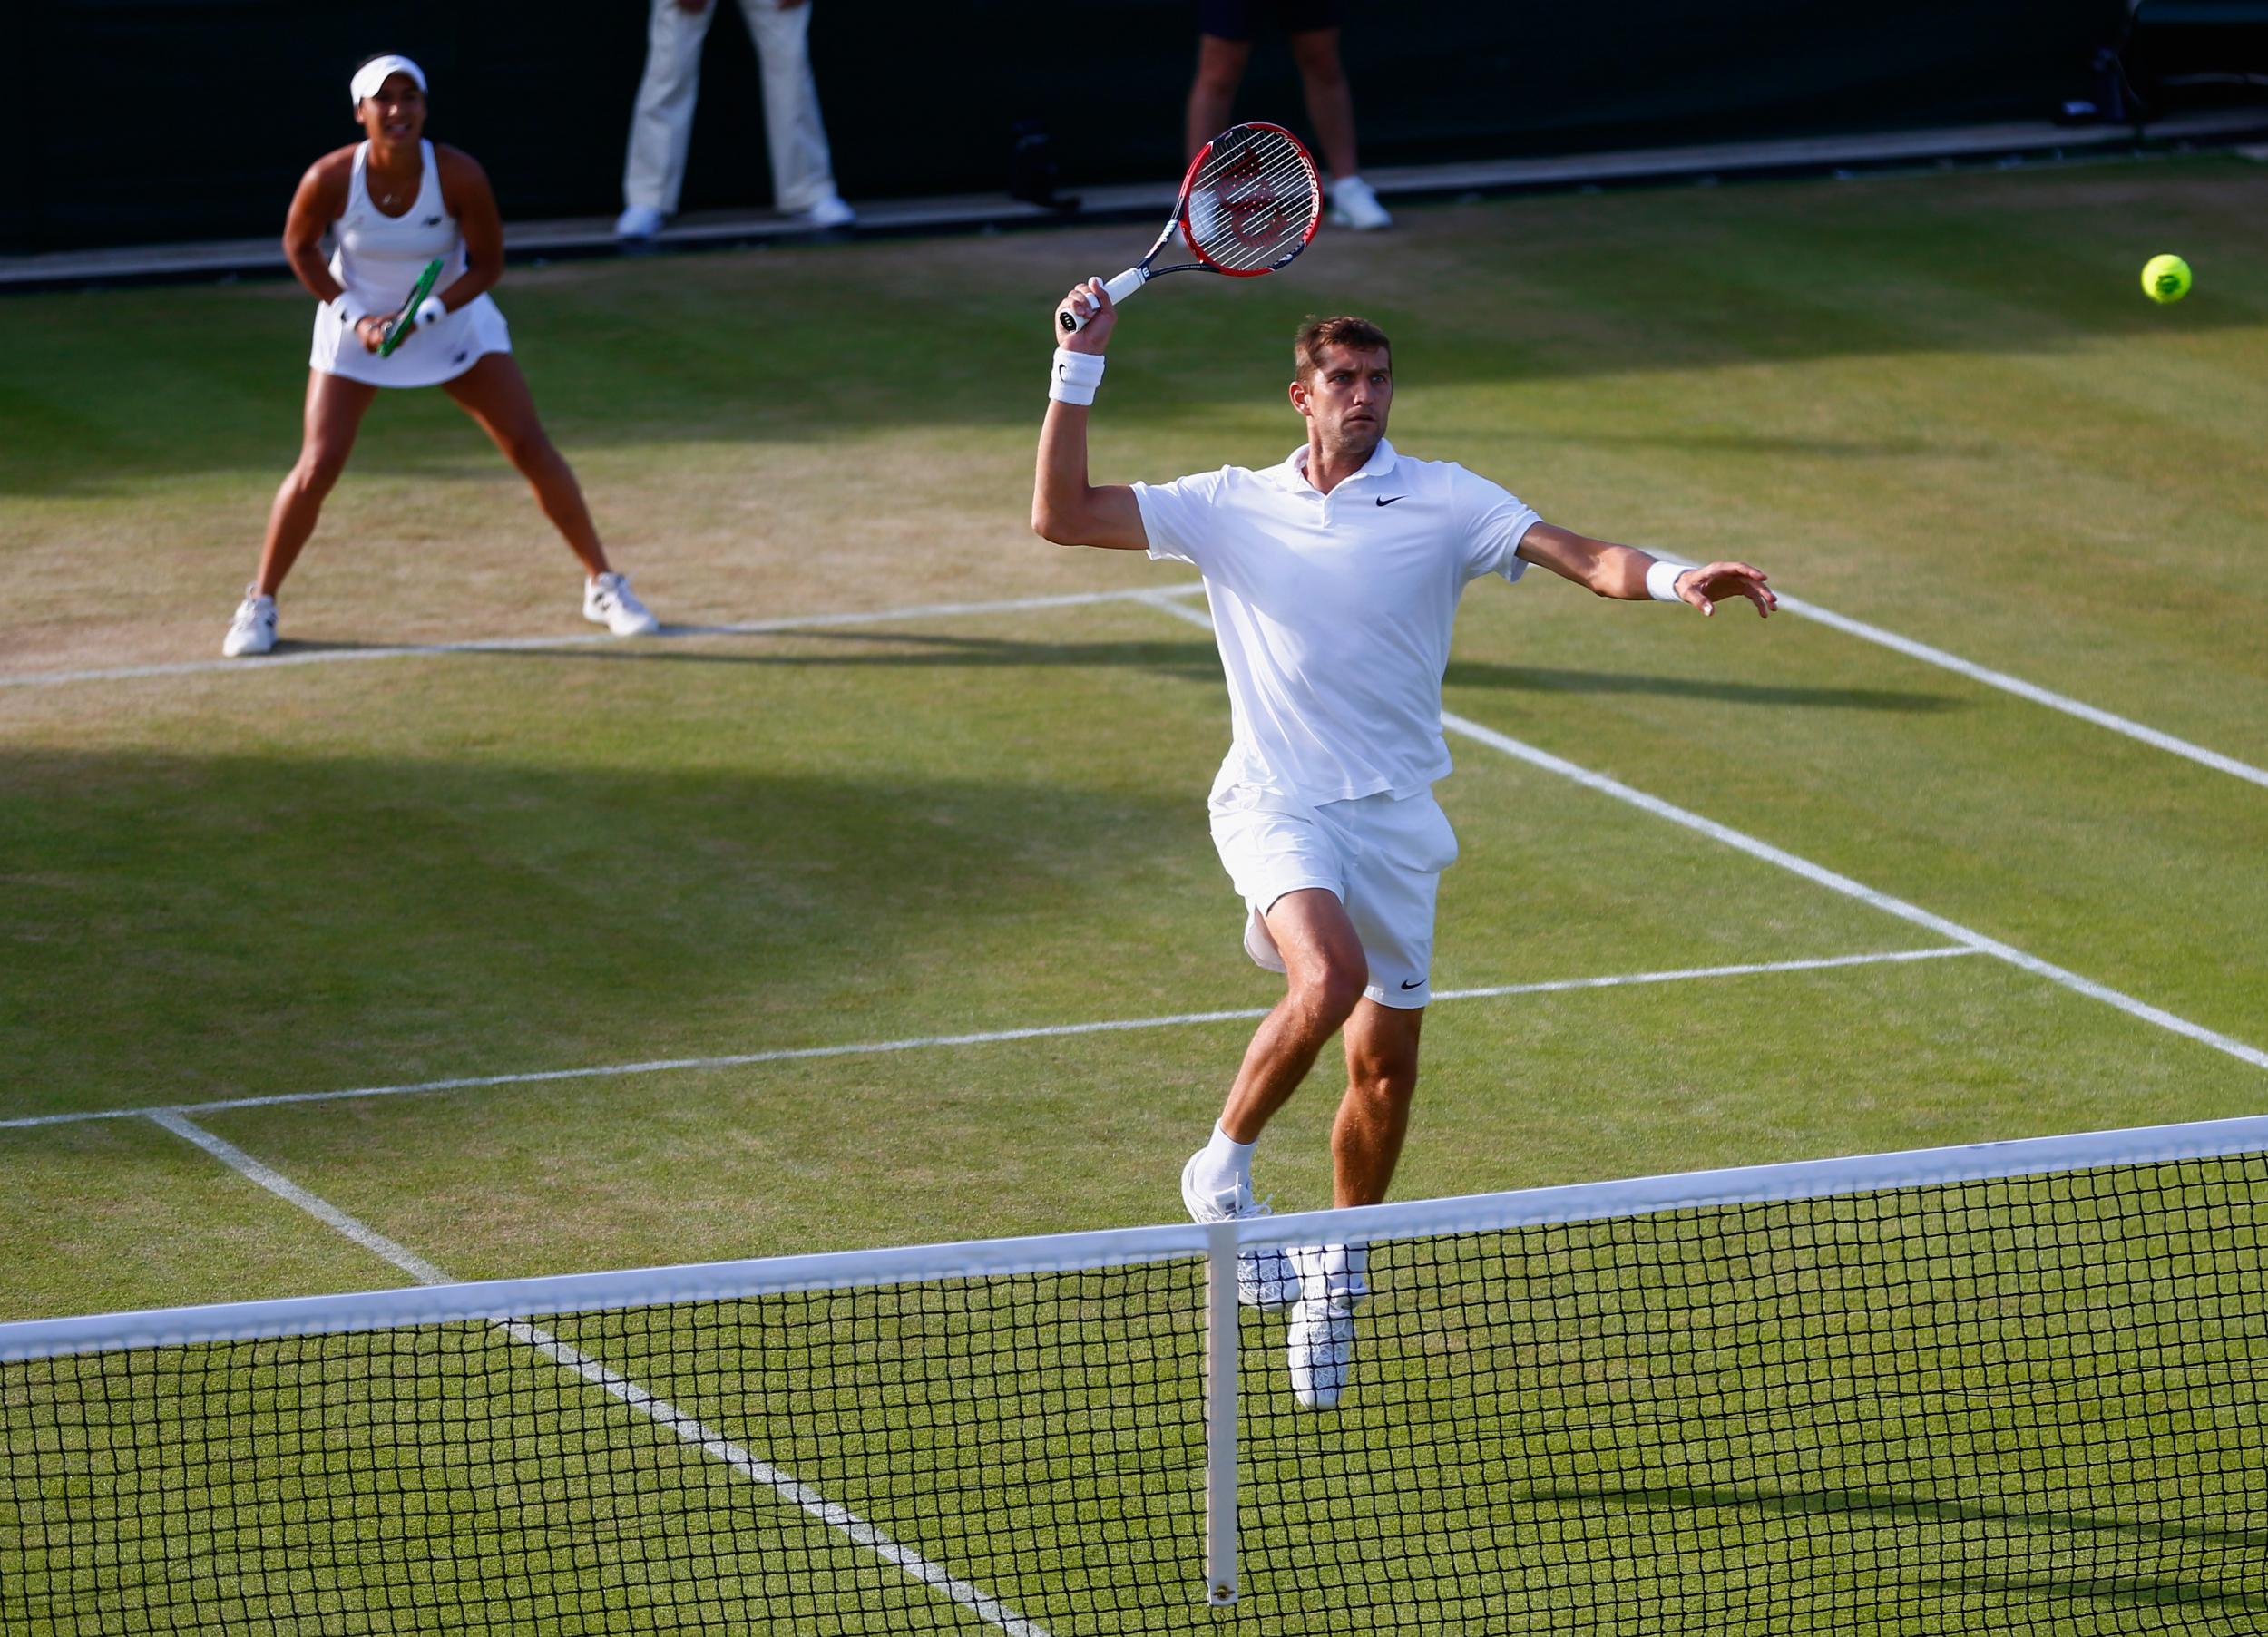 Mirnyi in action at Wimbledon in 2015